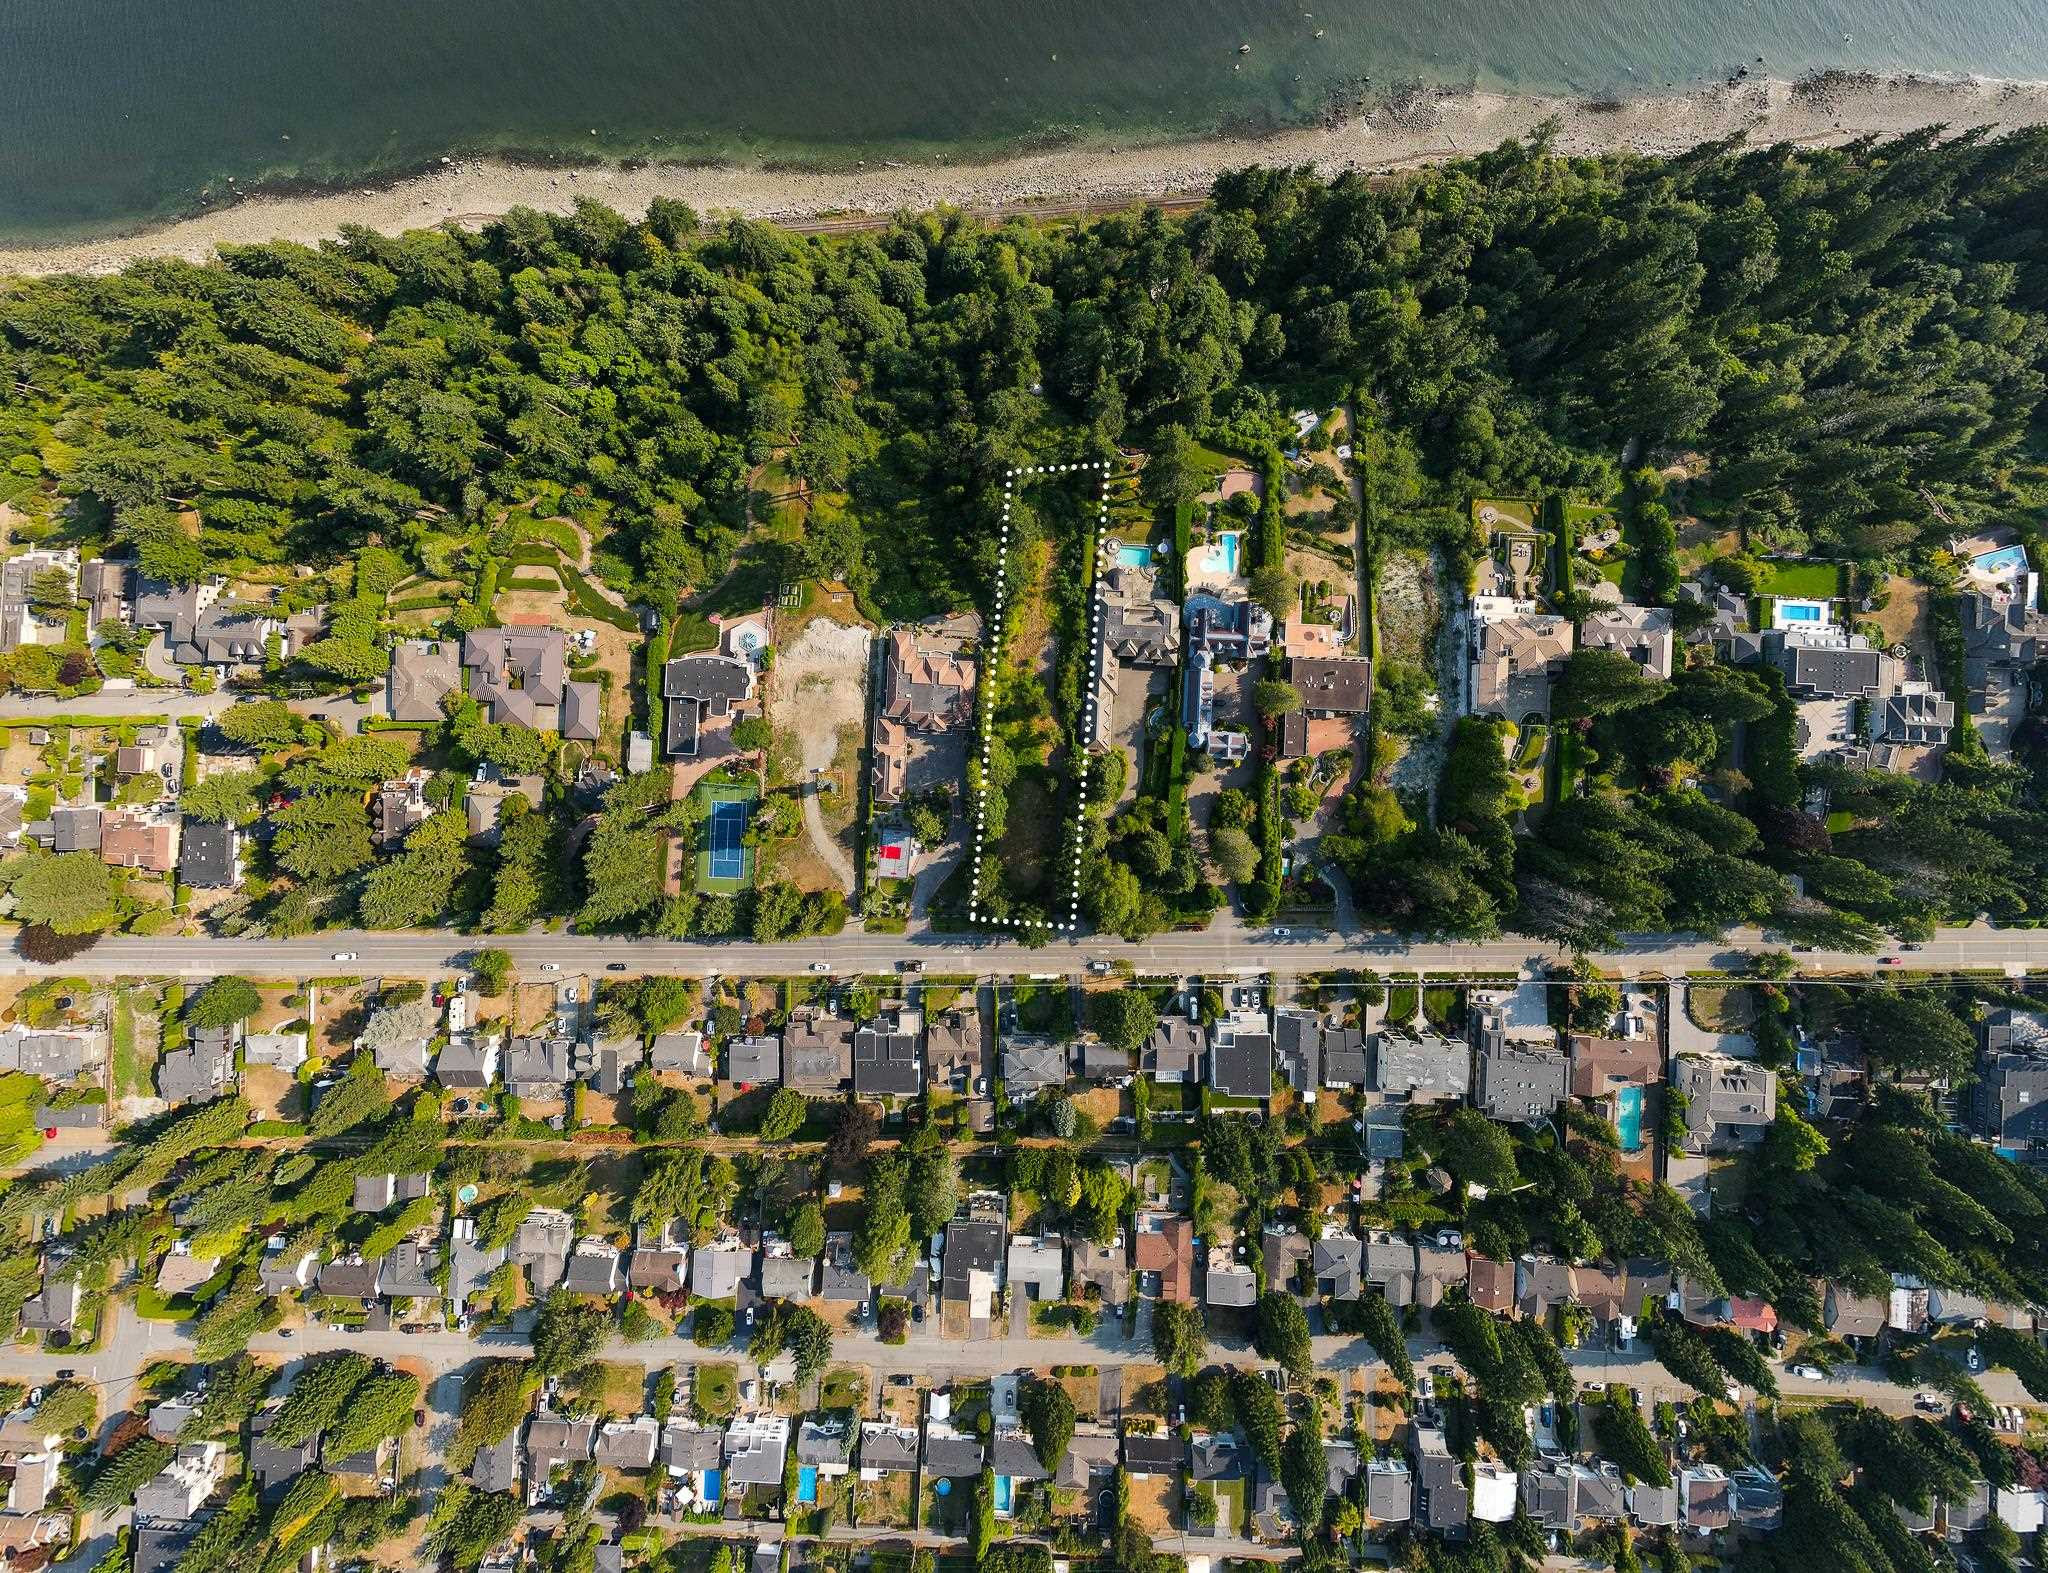 13808 MARINE, White Rock, British Columbia V4A 2J3, ,Land Only,For Sale,MARINE,R2740236